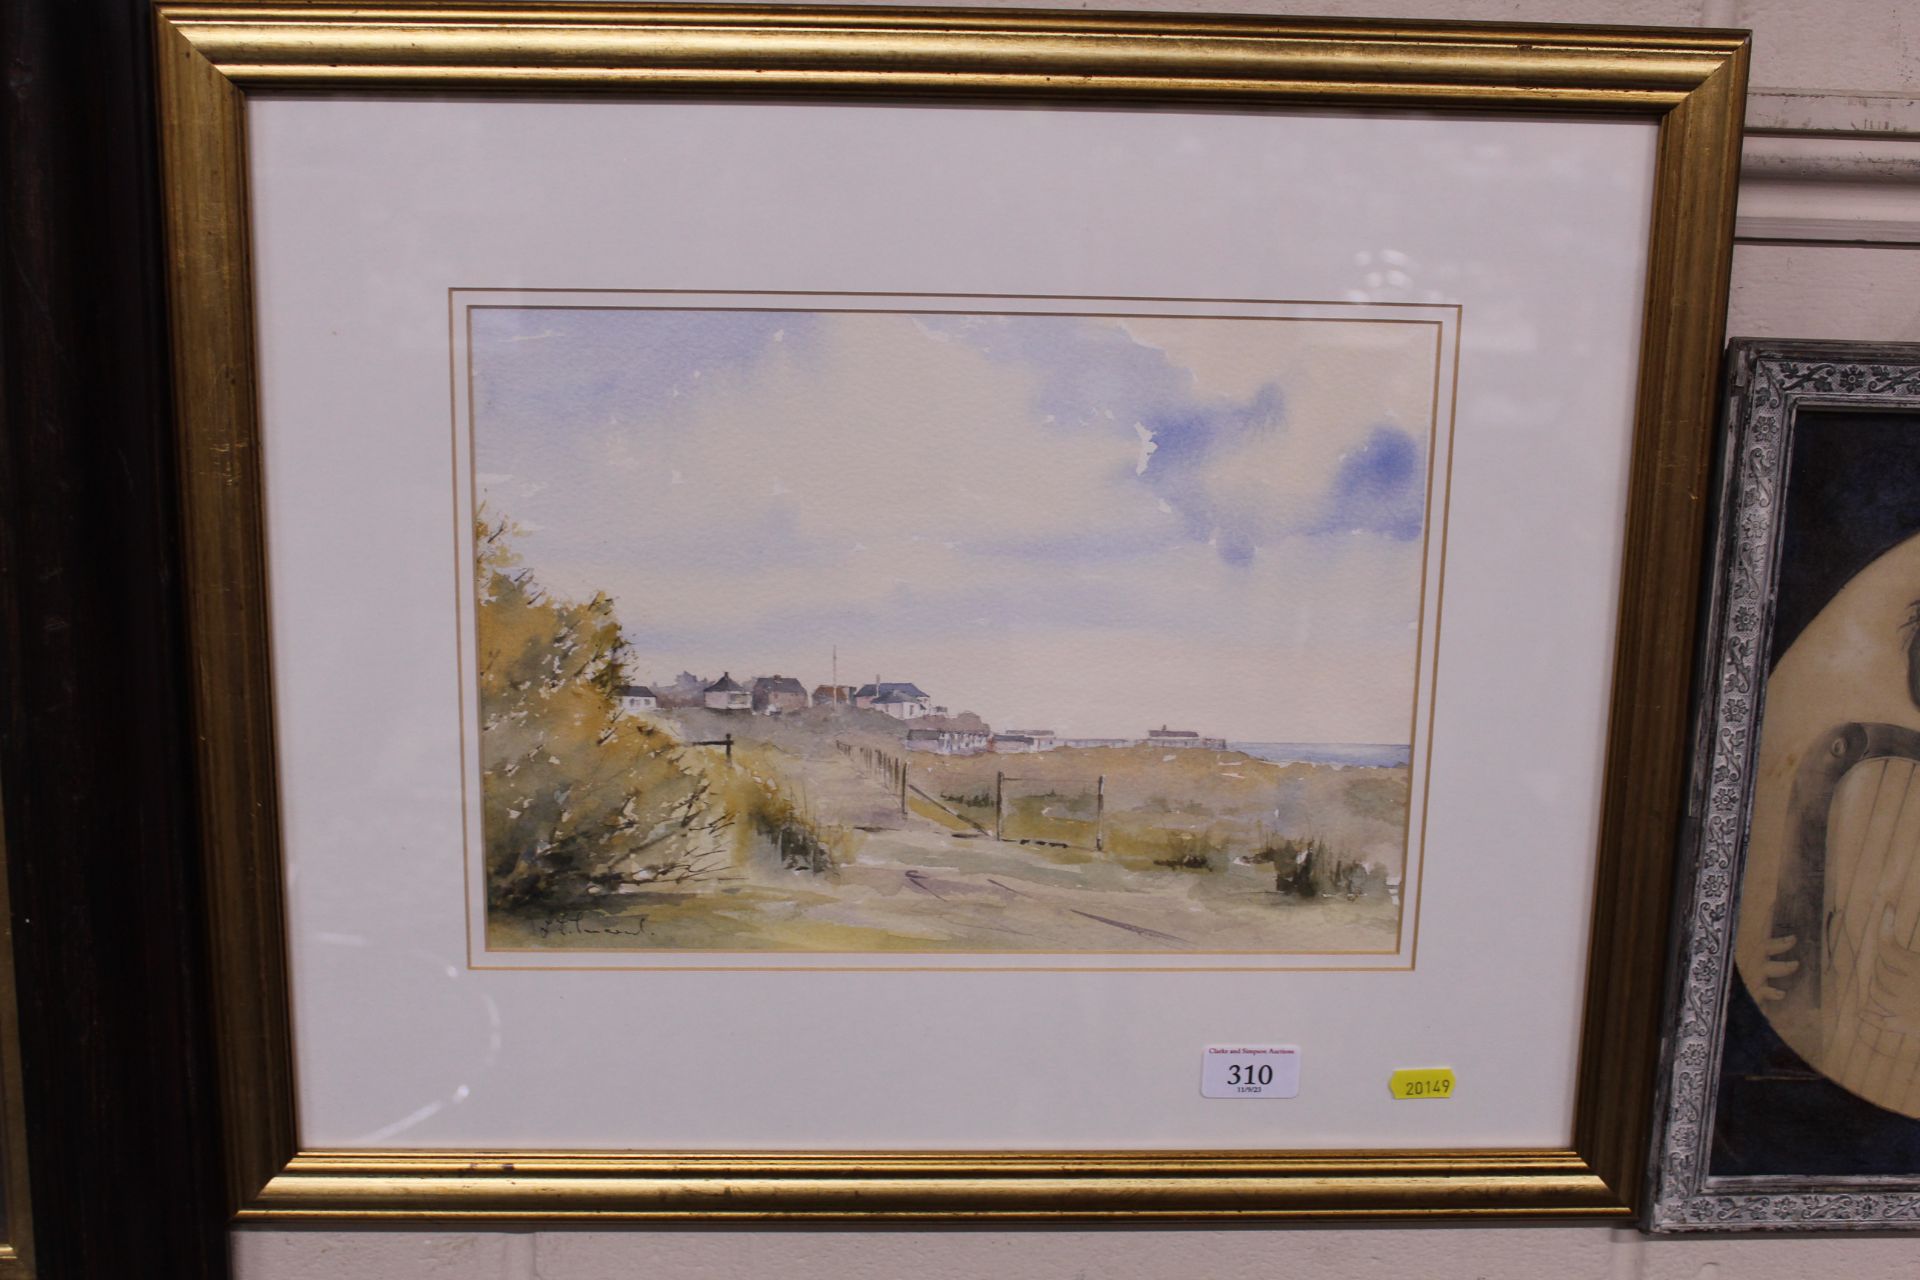 Townsend, watercolour study of dunes